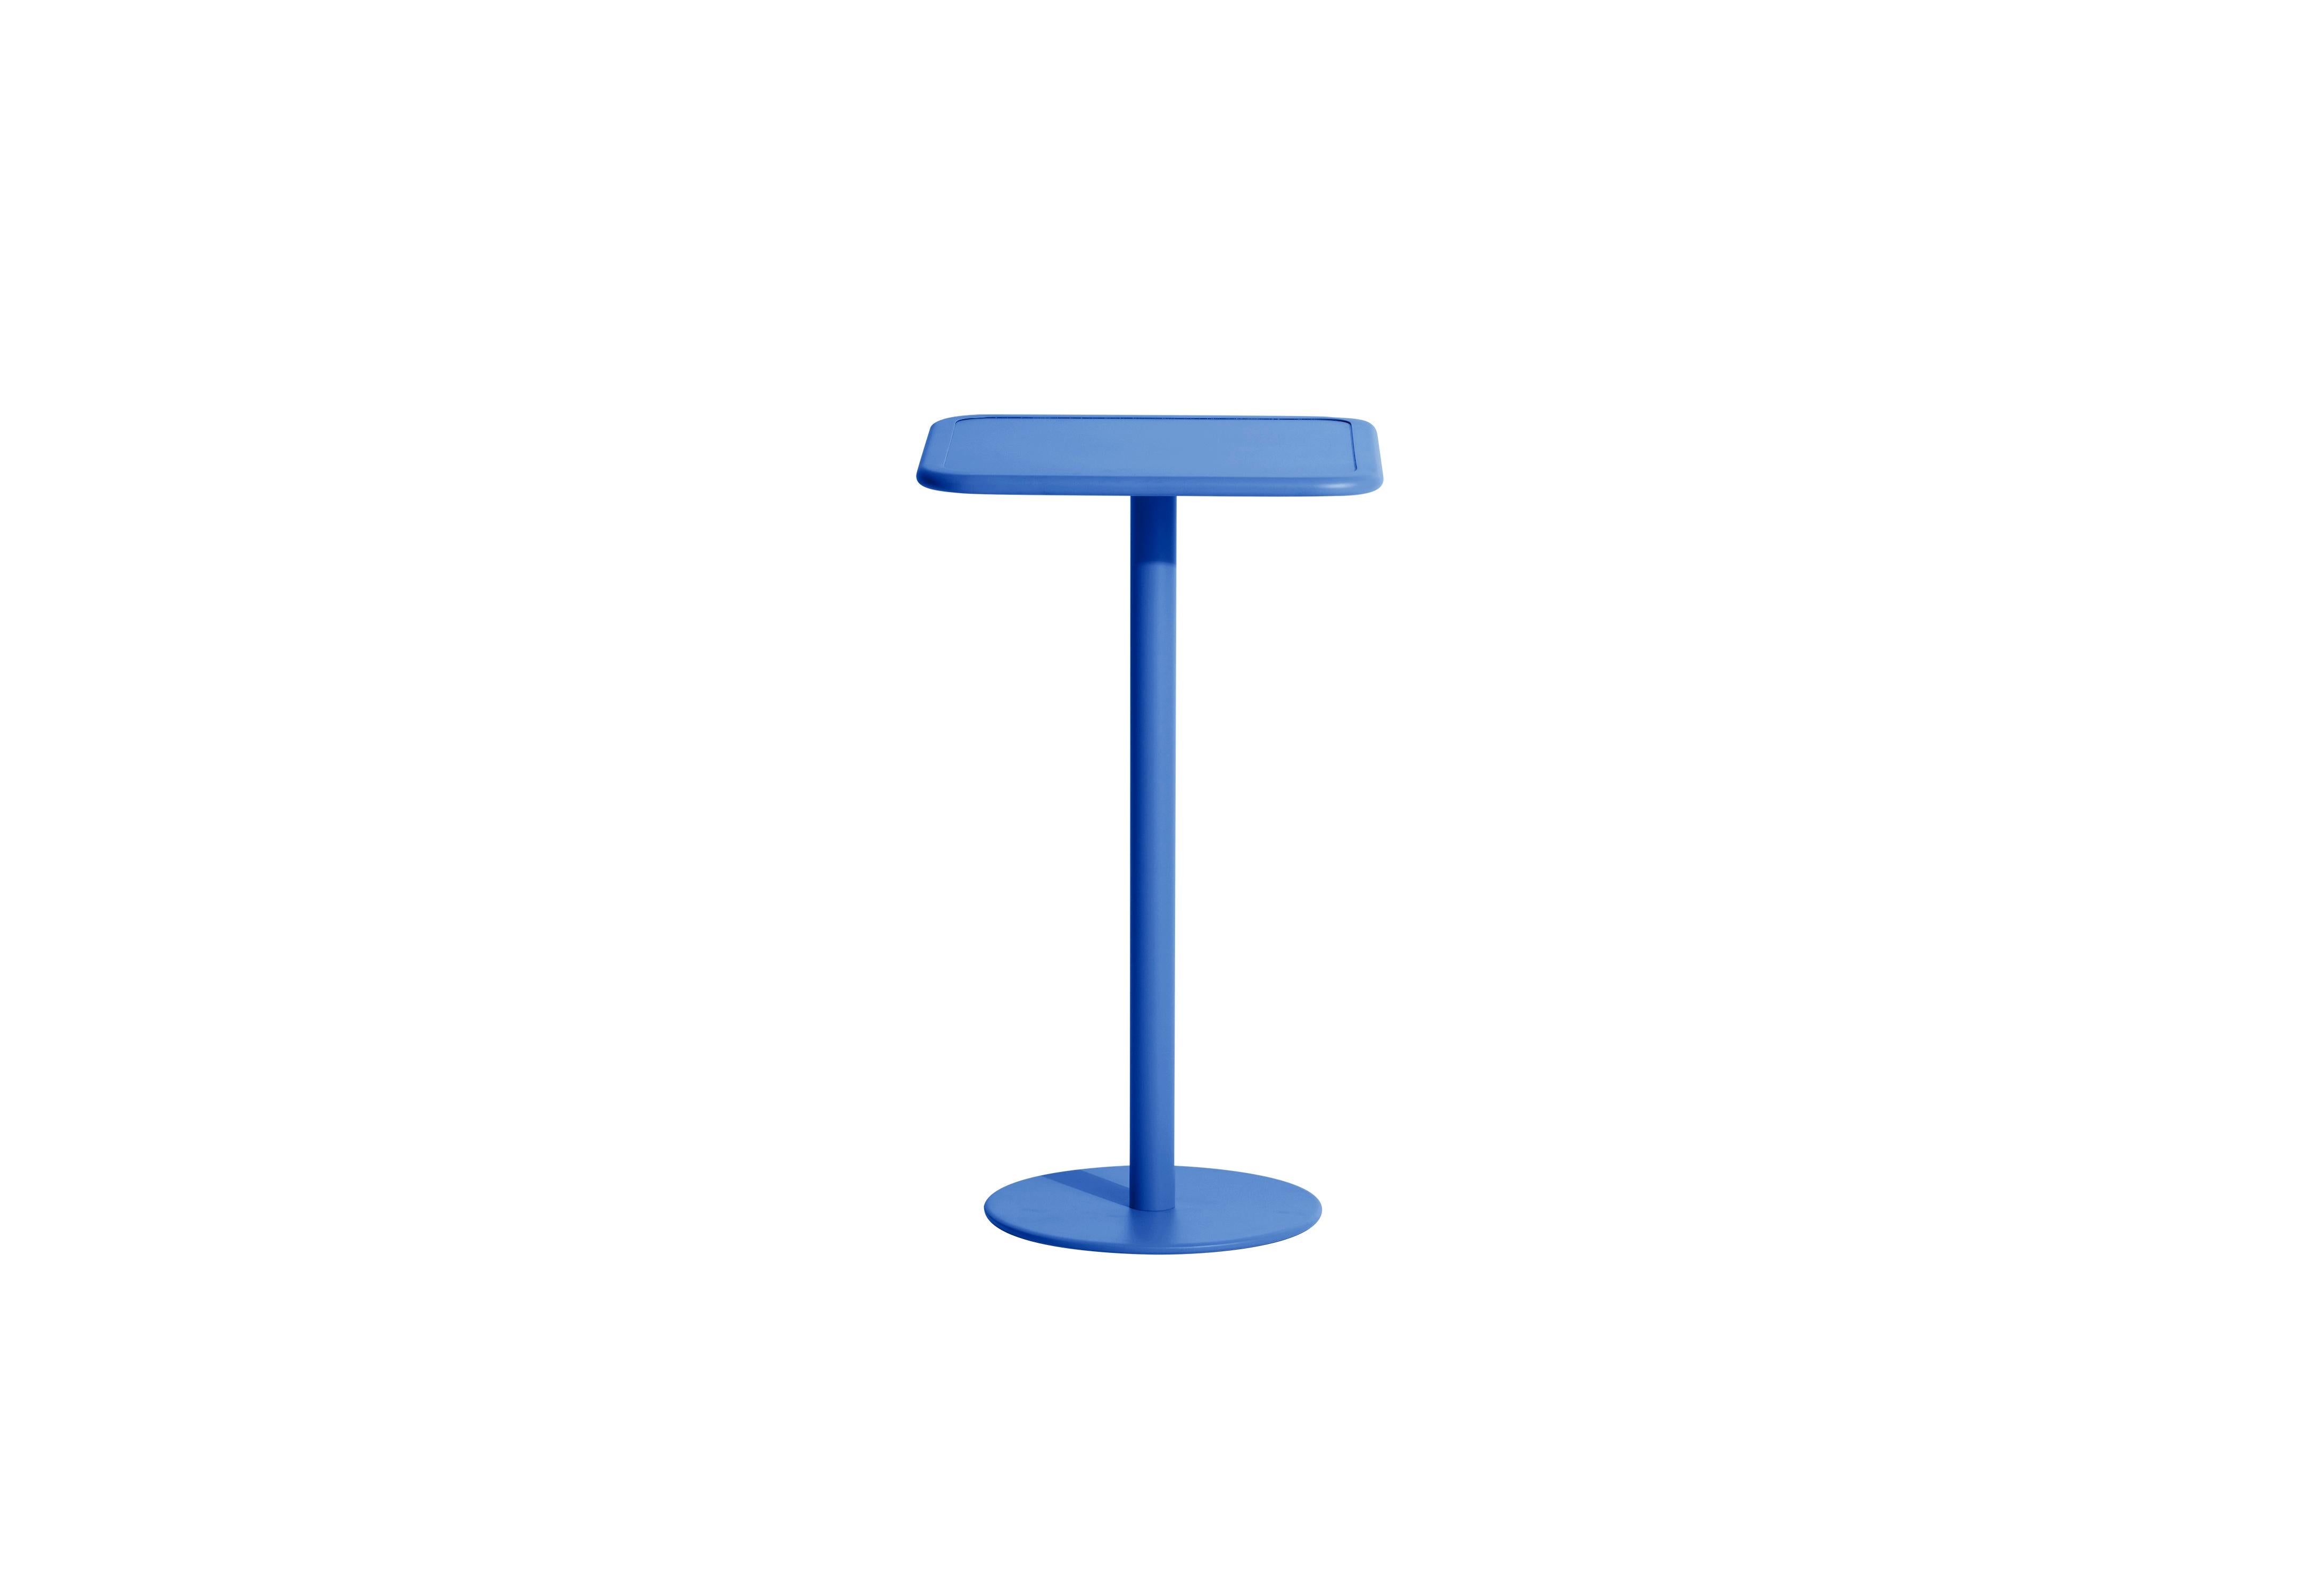 Petite Friture Week-End Square High Table in Blue Aluminium by Studio BrichetZiegler, 2017

The week-end collection is a full range of outdoor furniture, in aluminium grained epoxy paint, matt finish, that includes 18 functions and 8 colours for